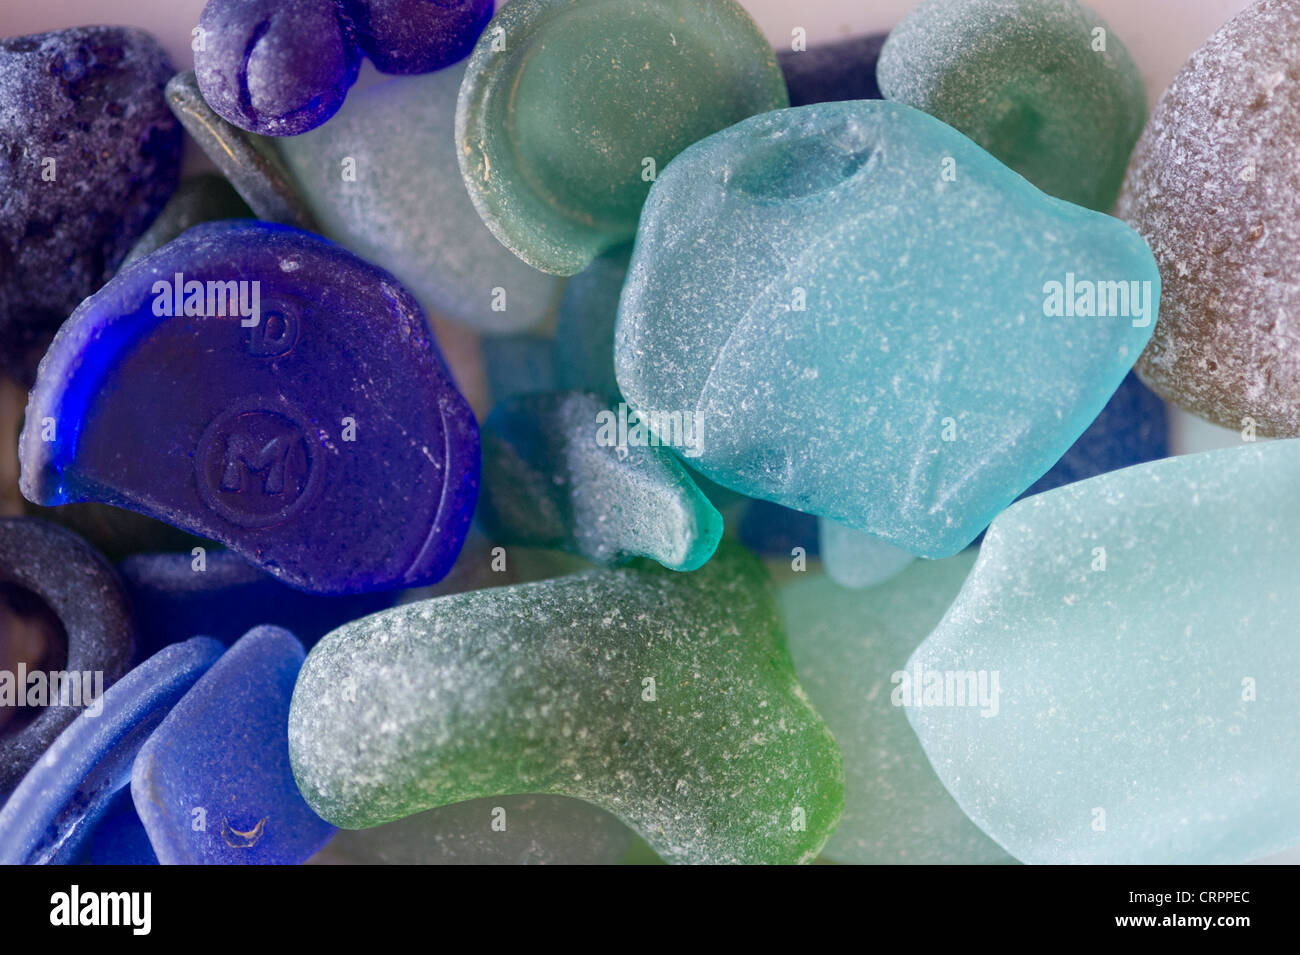 Blue and green sea glass Kent Island Maryland USA Banque D'Images